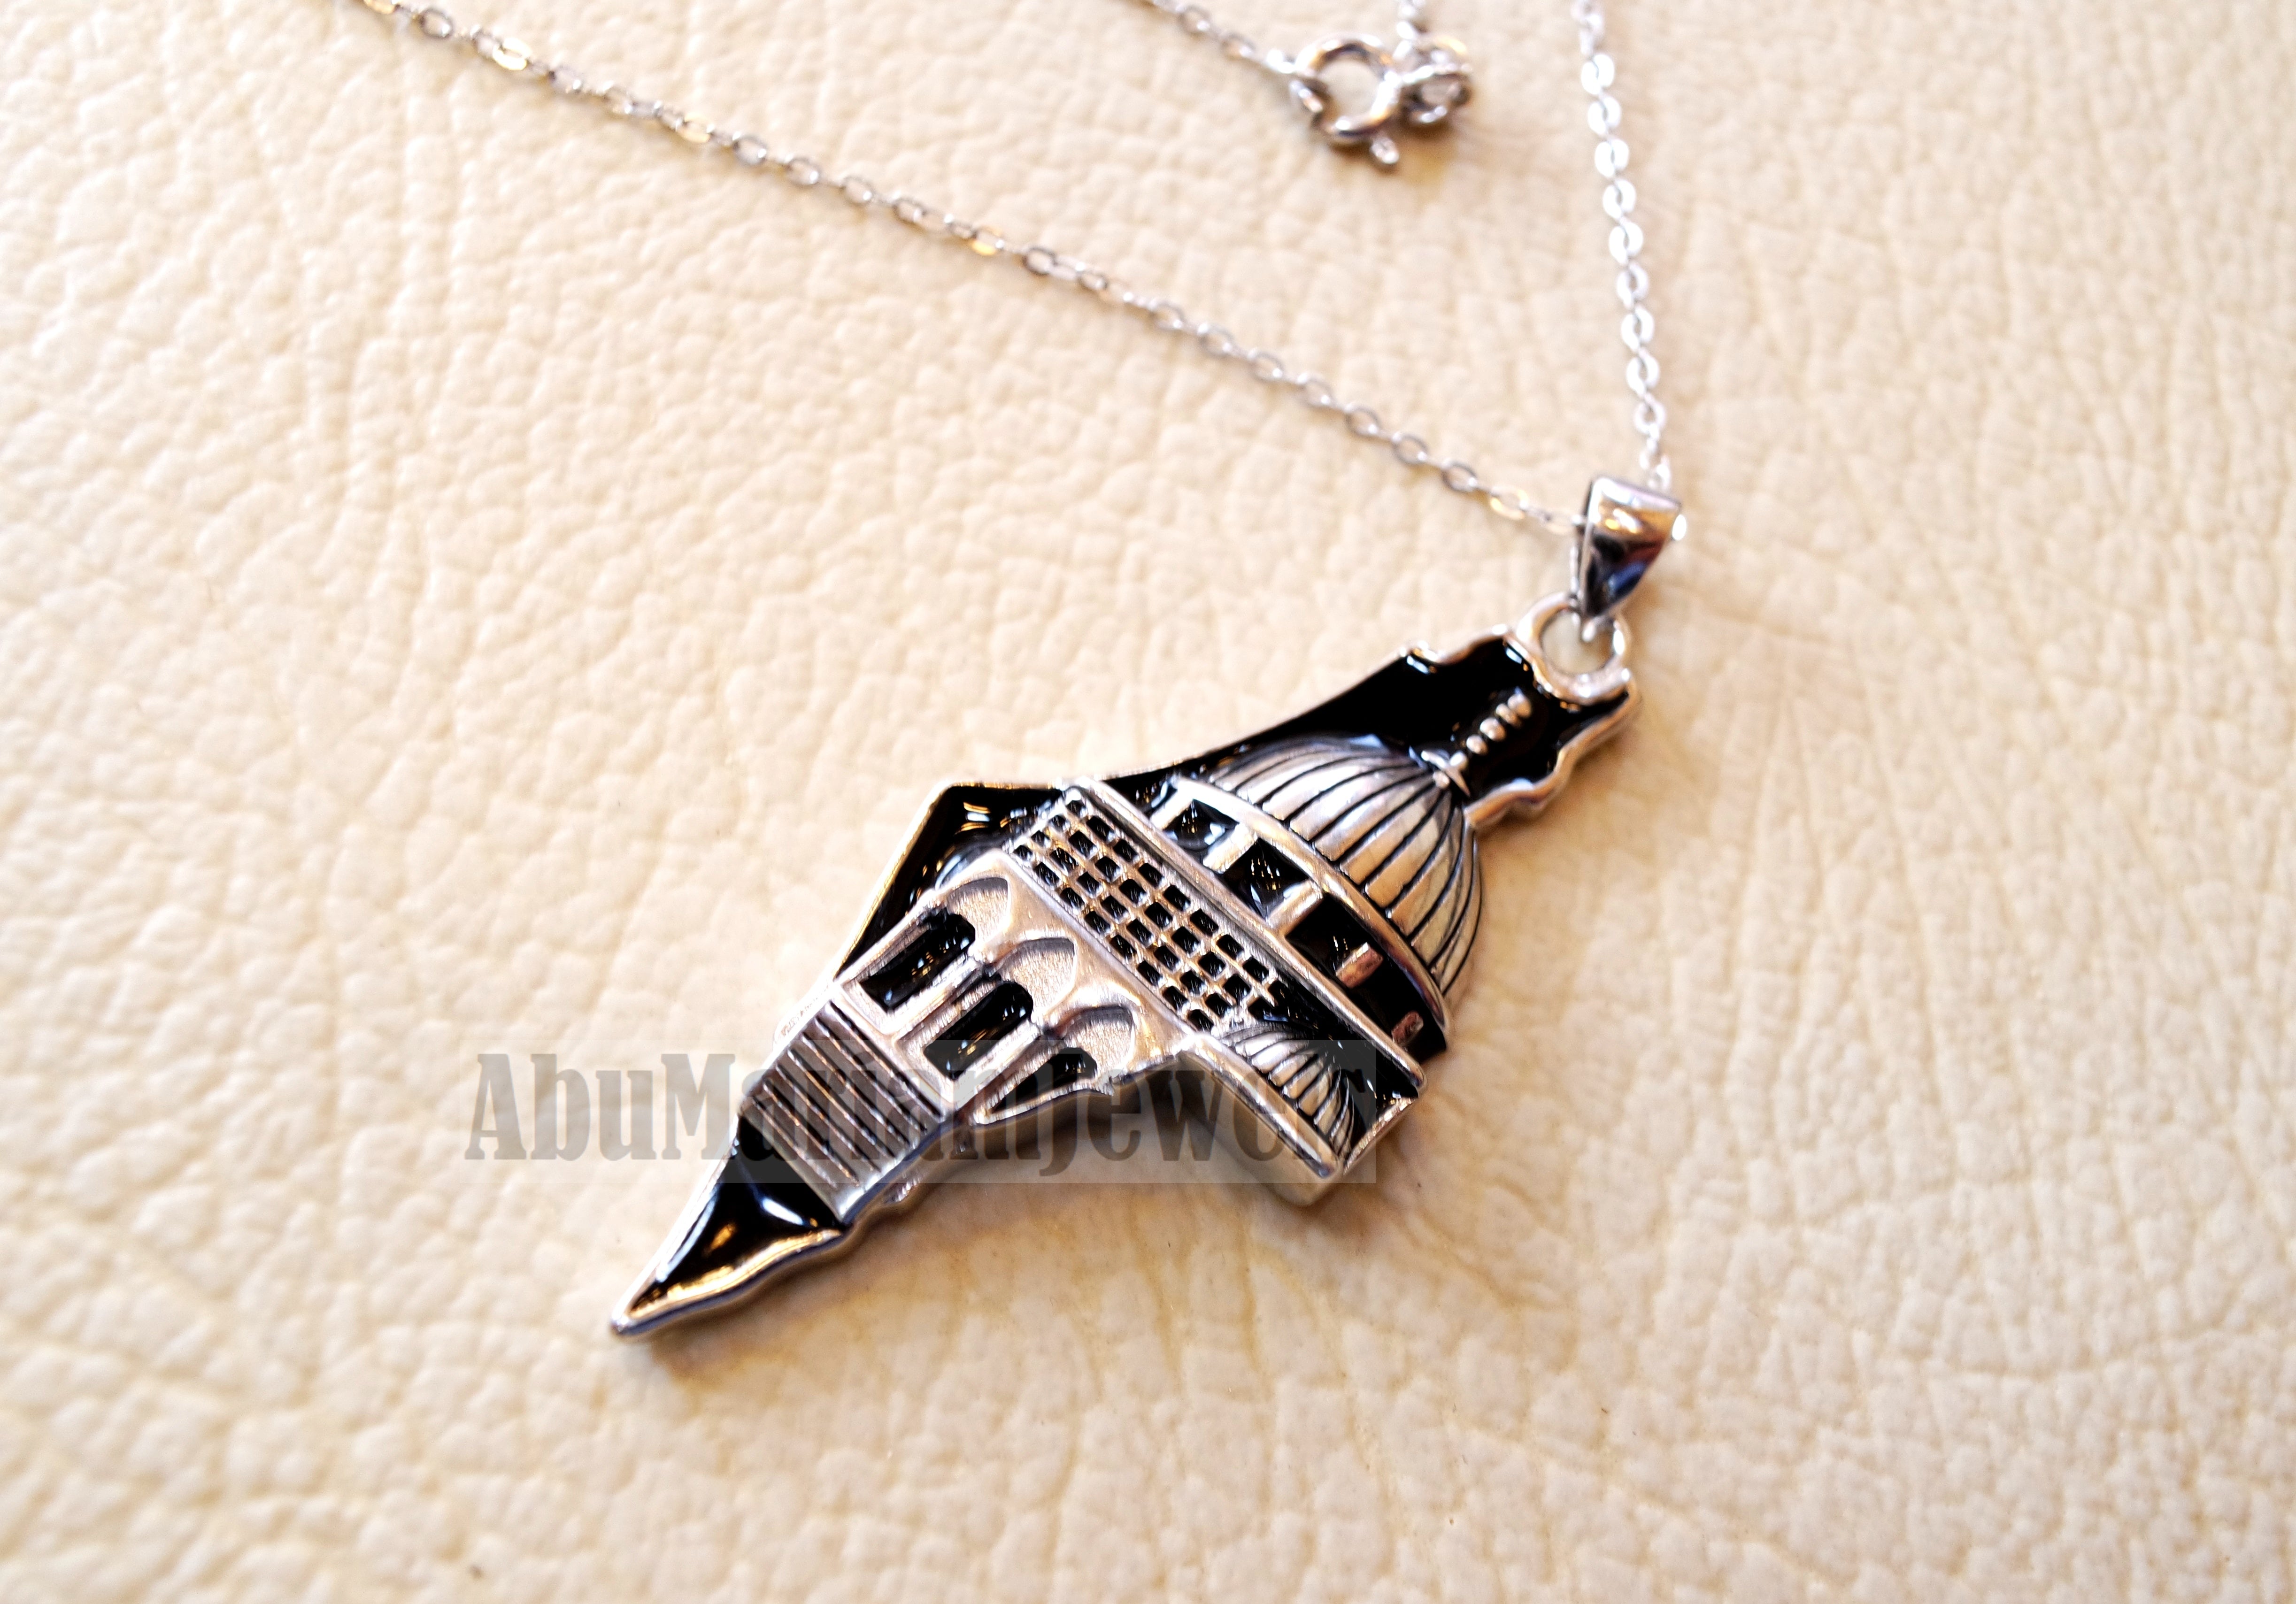 Big Palestine map with Aqsa mosque pendant sterling silver 925 white and black jewelry arabic fast shipping خارطه و علم فلسطين